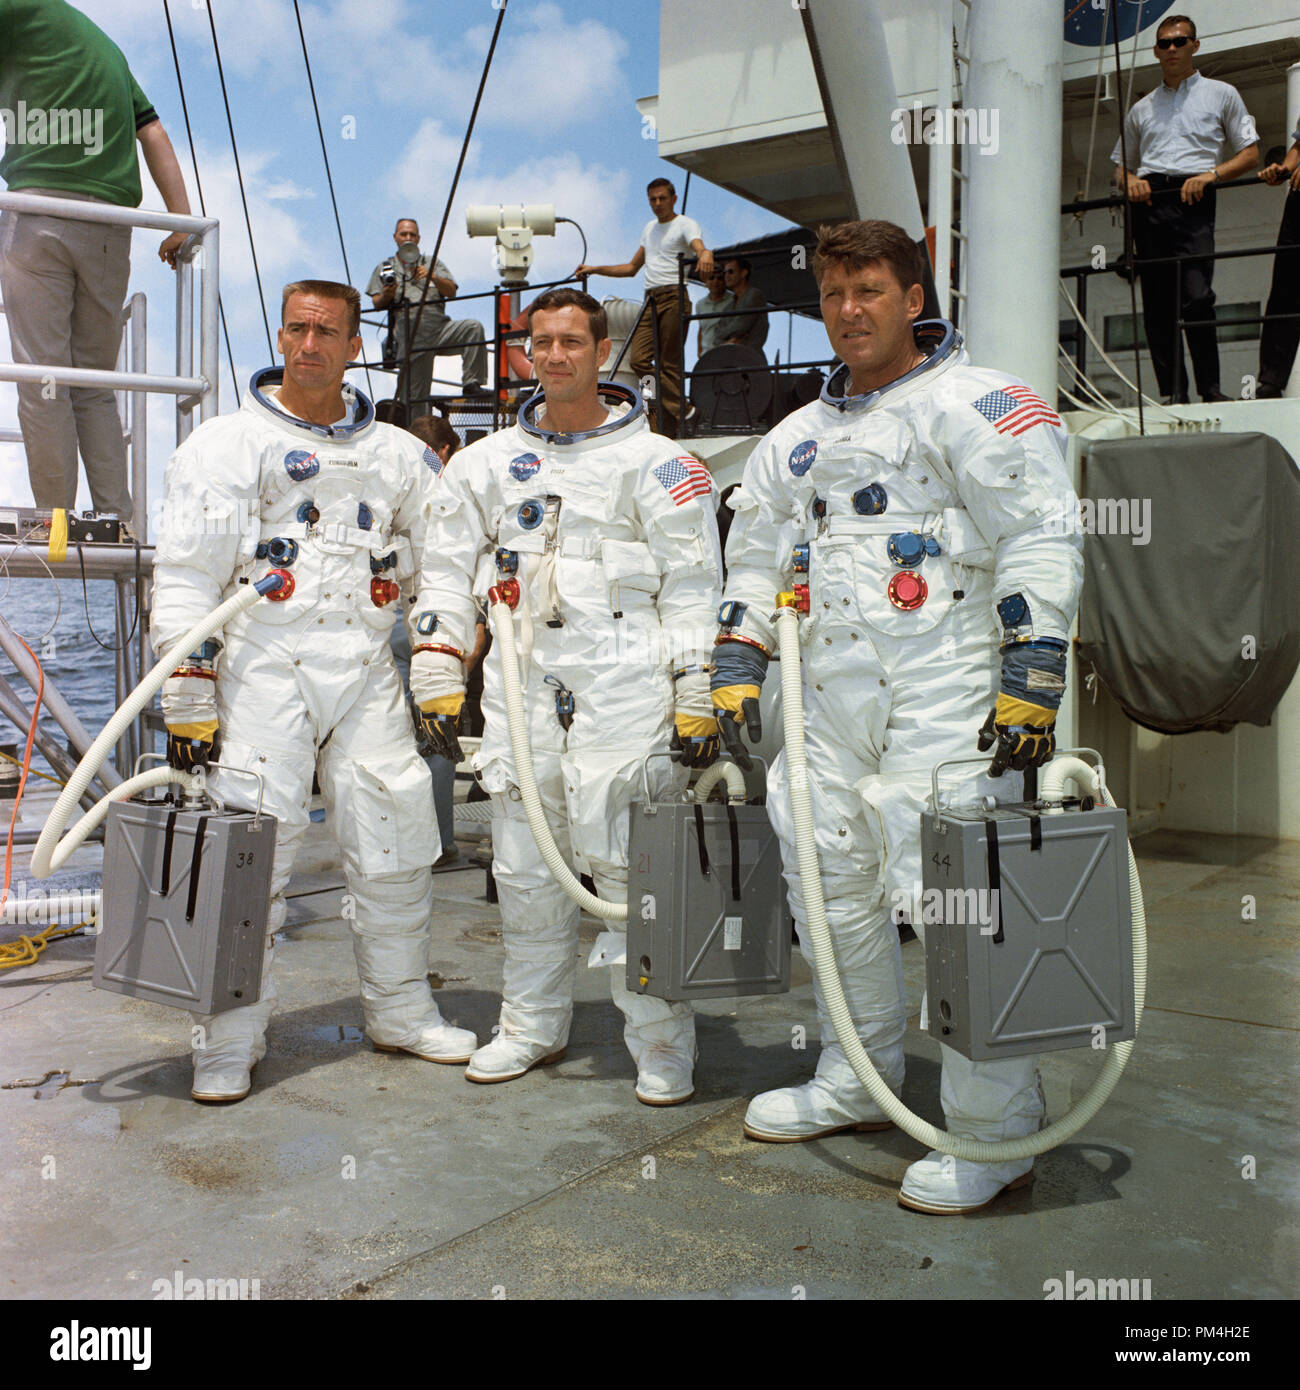 The prime crew of the first manned Apollo space mission, Apollo 7, stands on the deck of the NASA Motor Vessel Retriever after suiting up for water egress training in the Gulf of Mexico. Left to right, are astronauts Walter Cunningham, Donn F. Eisele, and Walter M. Schirra Jr. (1968)   File Reference # 1003 192THA Stock Photo